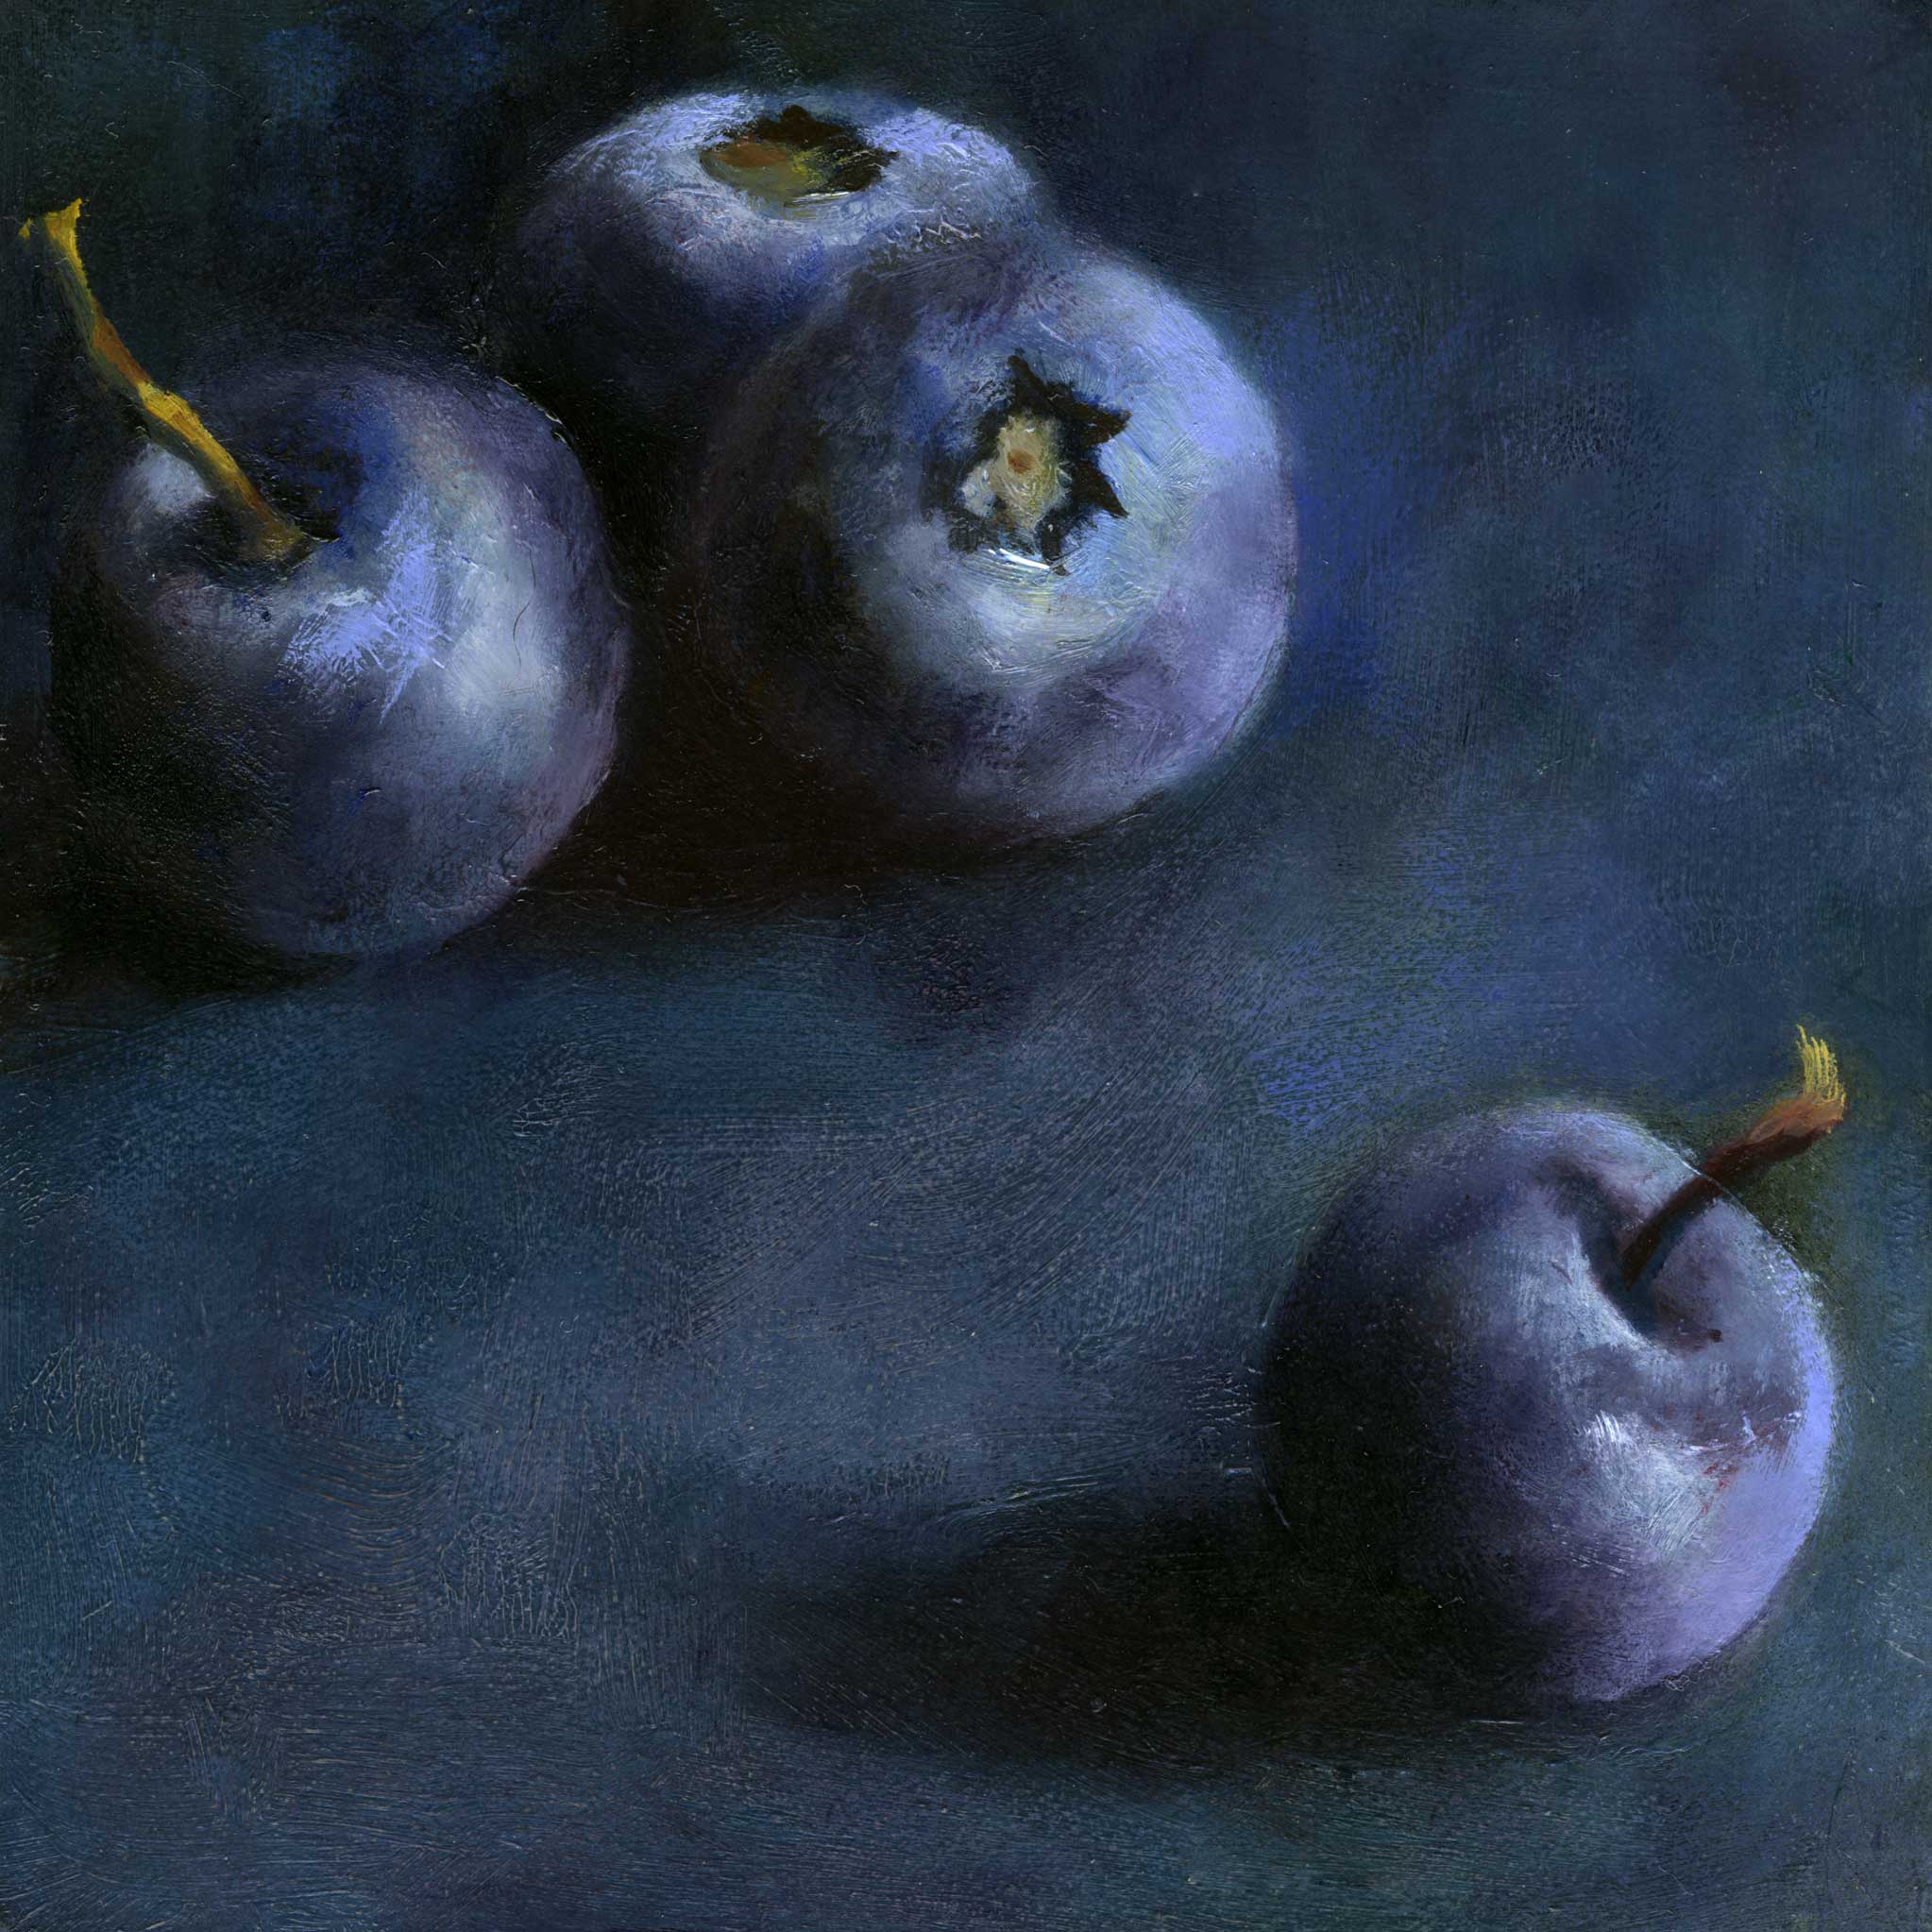 Four plum navy blueberries scattered on a dark indigo background. This is an archival print of my realistic oil painting still life. The original square artwork is sold.